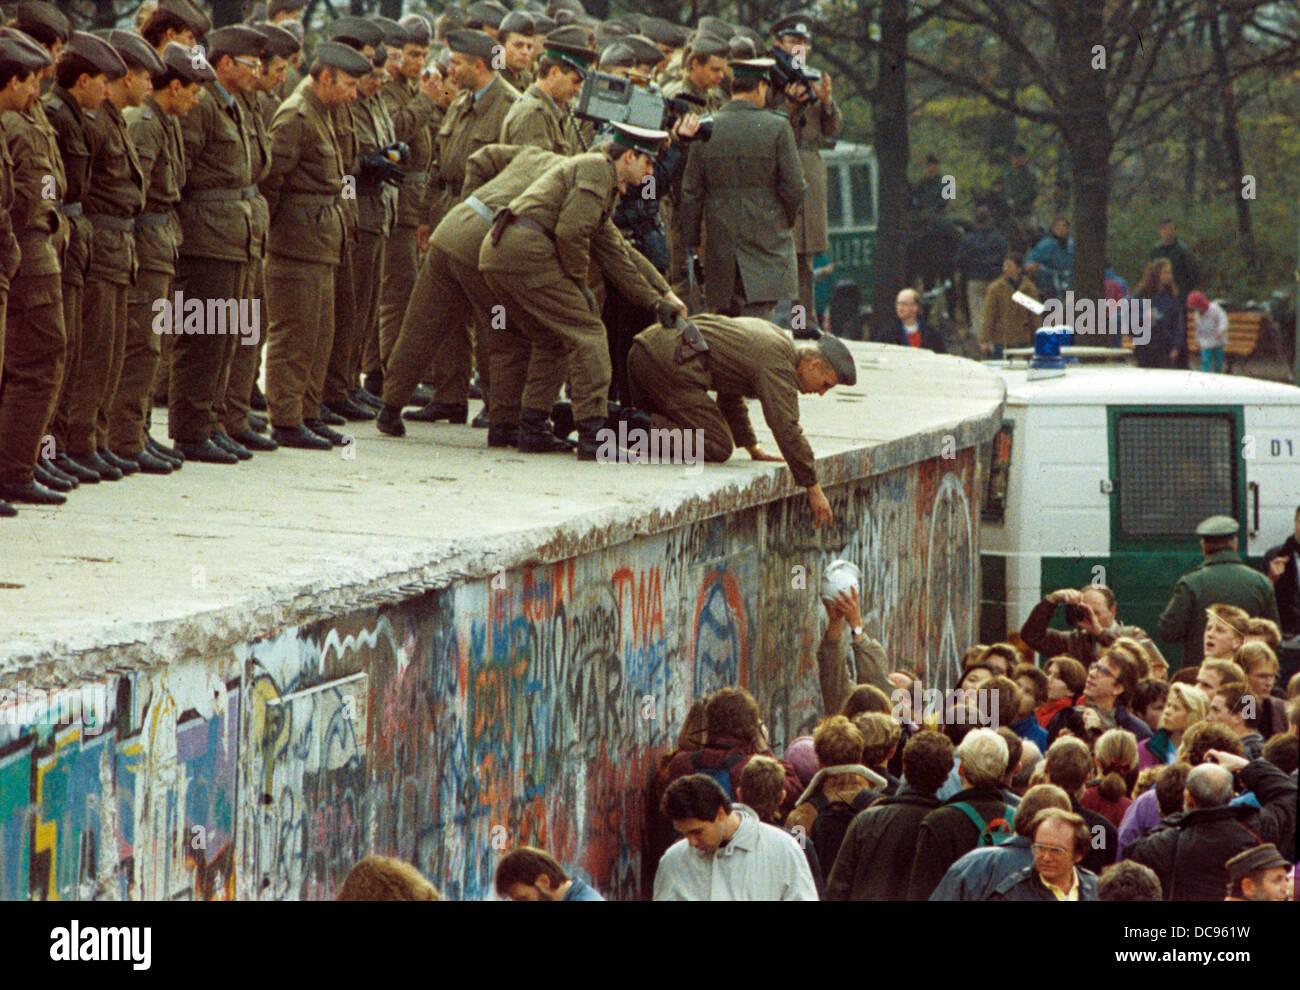 Citizens of West Berlin hand a pot of coffee to GDR border forces on the Berlin Wall, Germany, 11 November 1989. The Wall was opened in the night of 09/10 November. Stock Photo